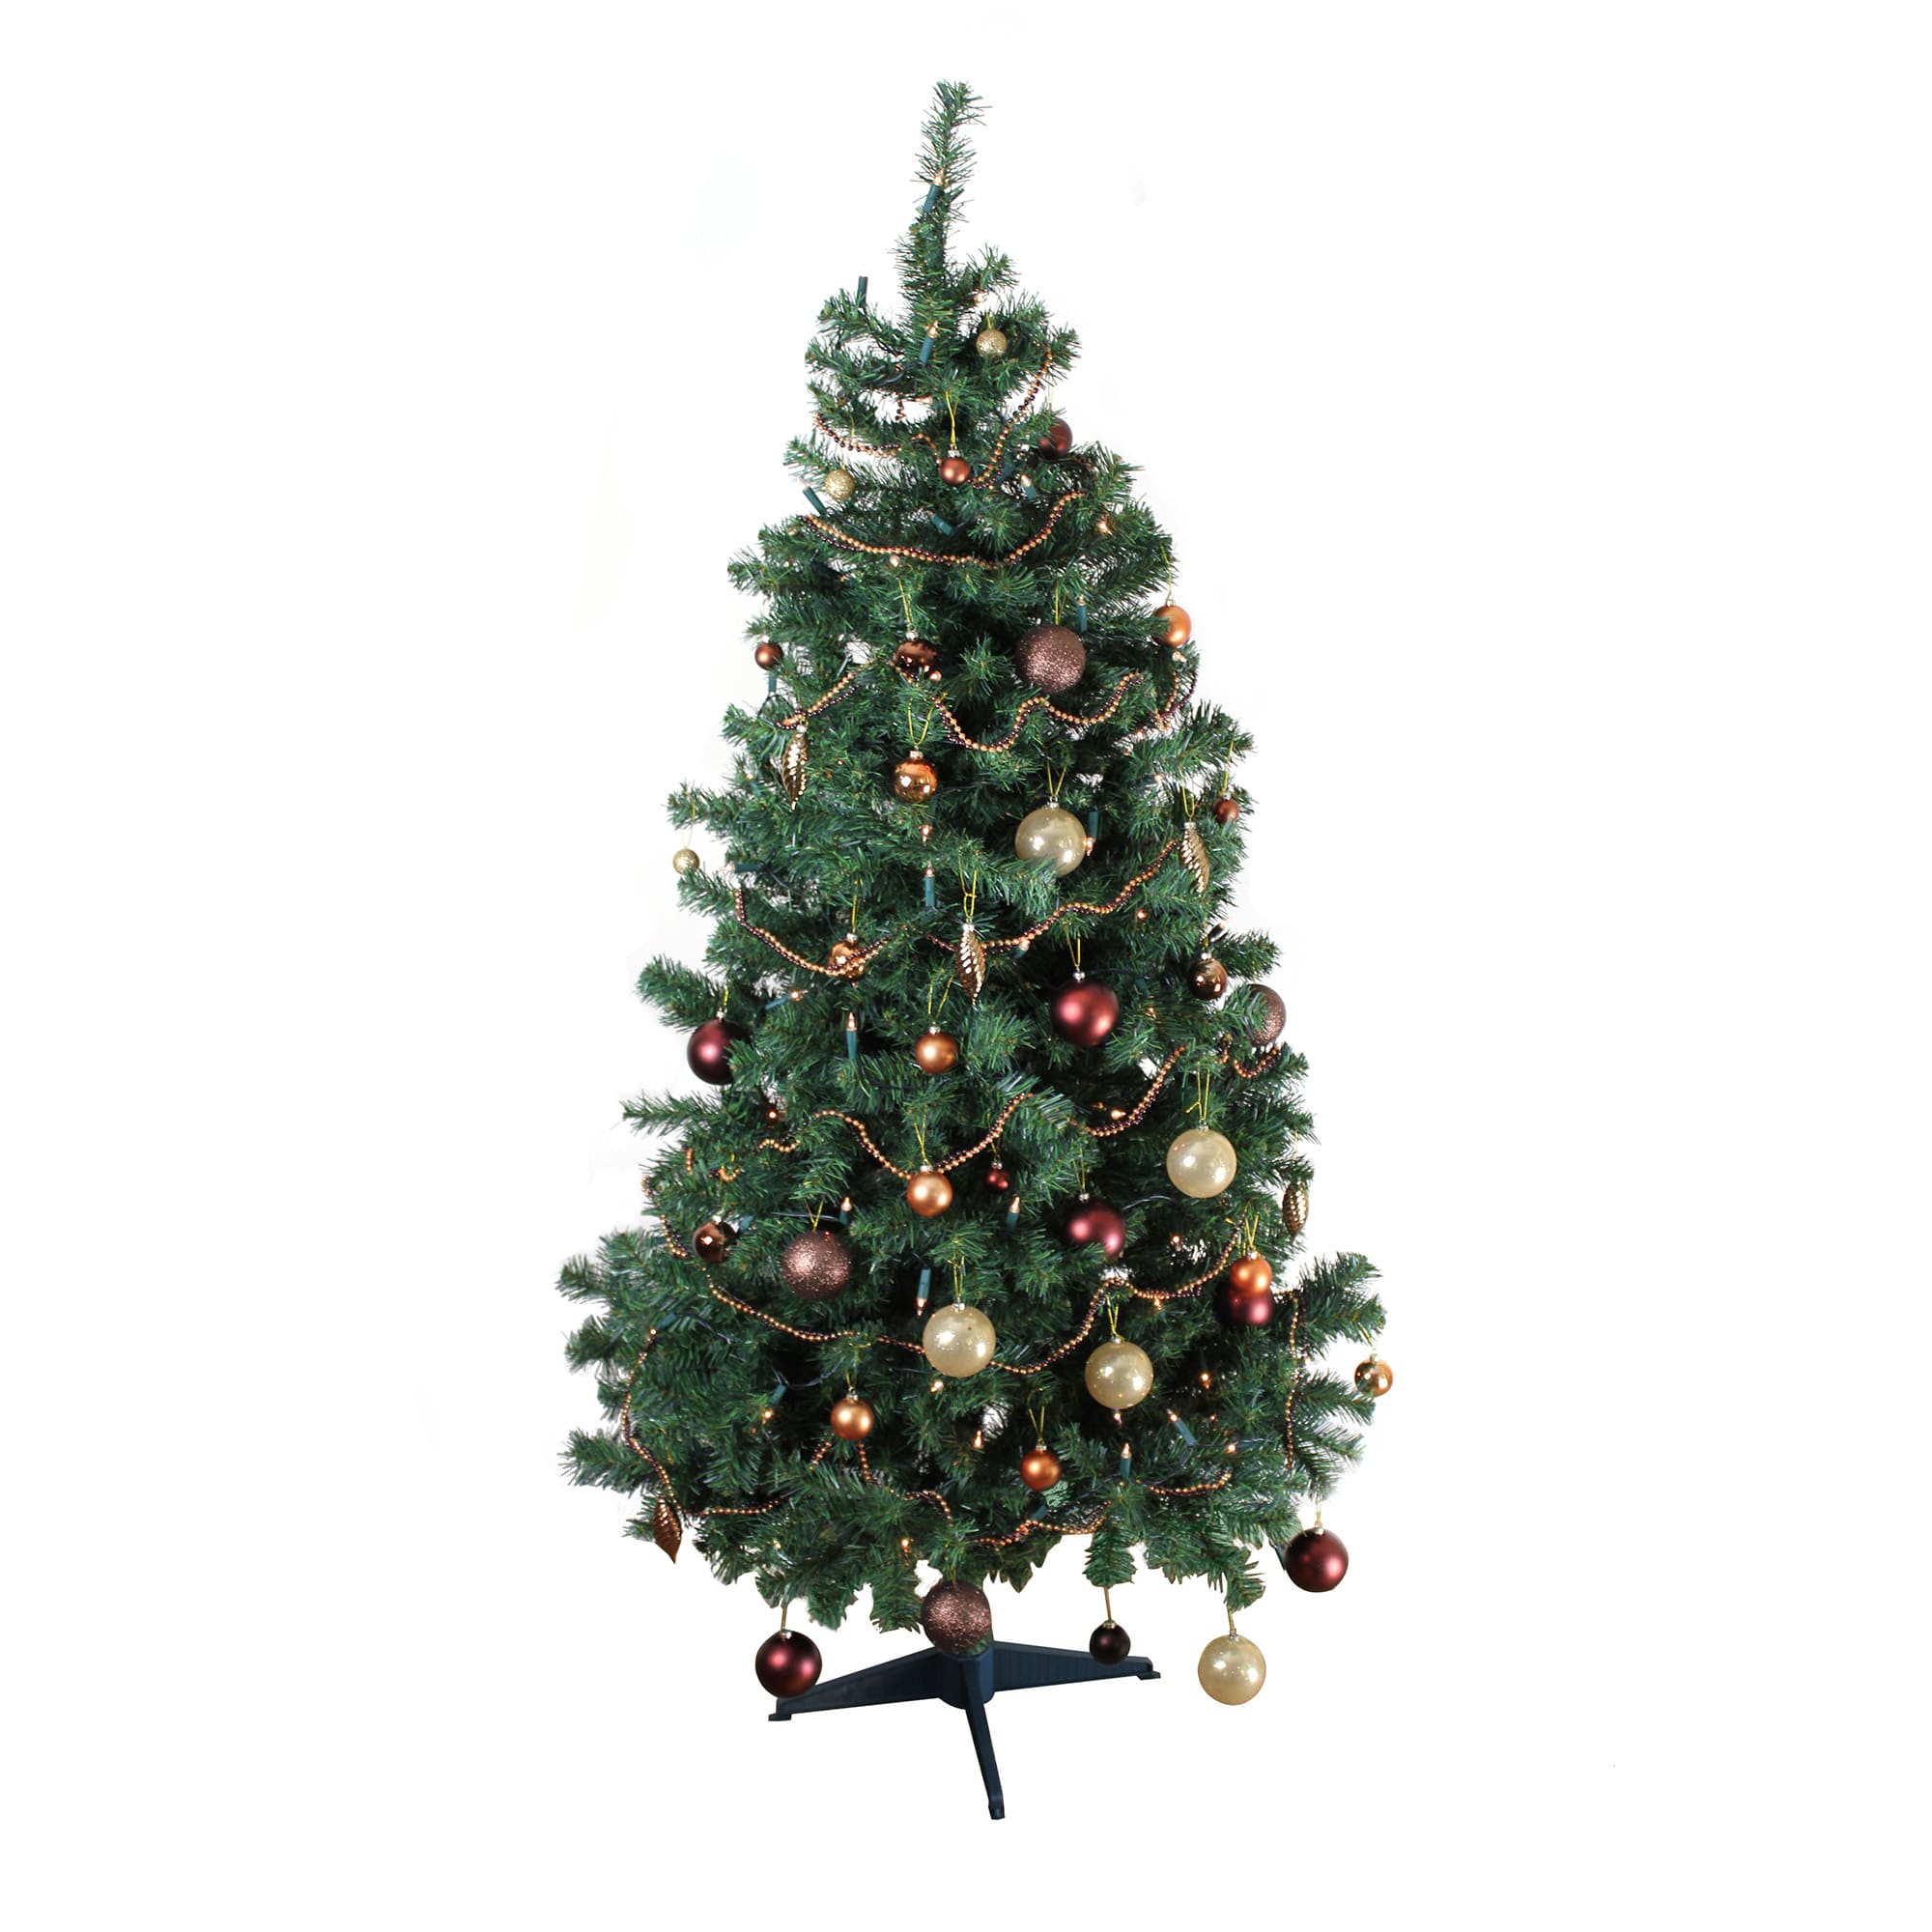 Homegear Alpine Deluxe 6ft 700 Tips Artificial Christmas Tree